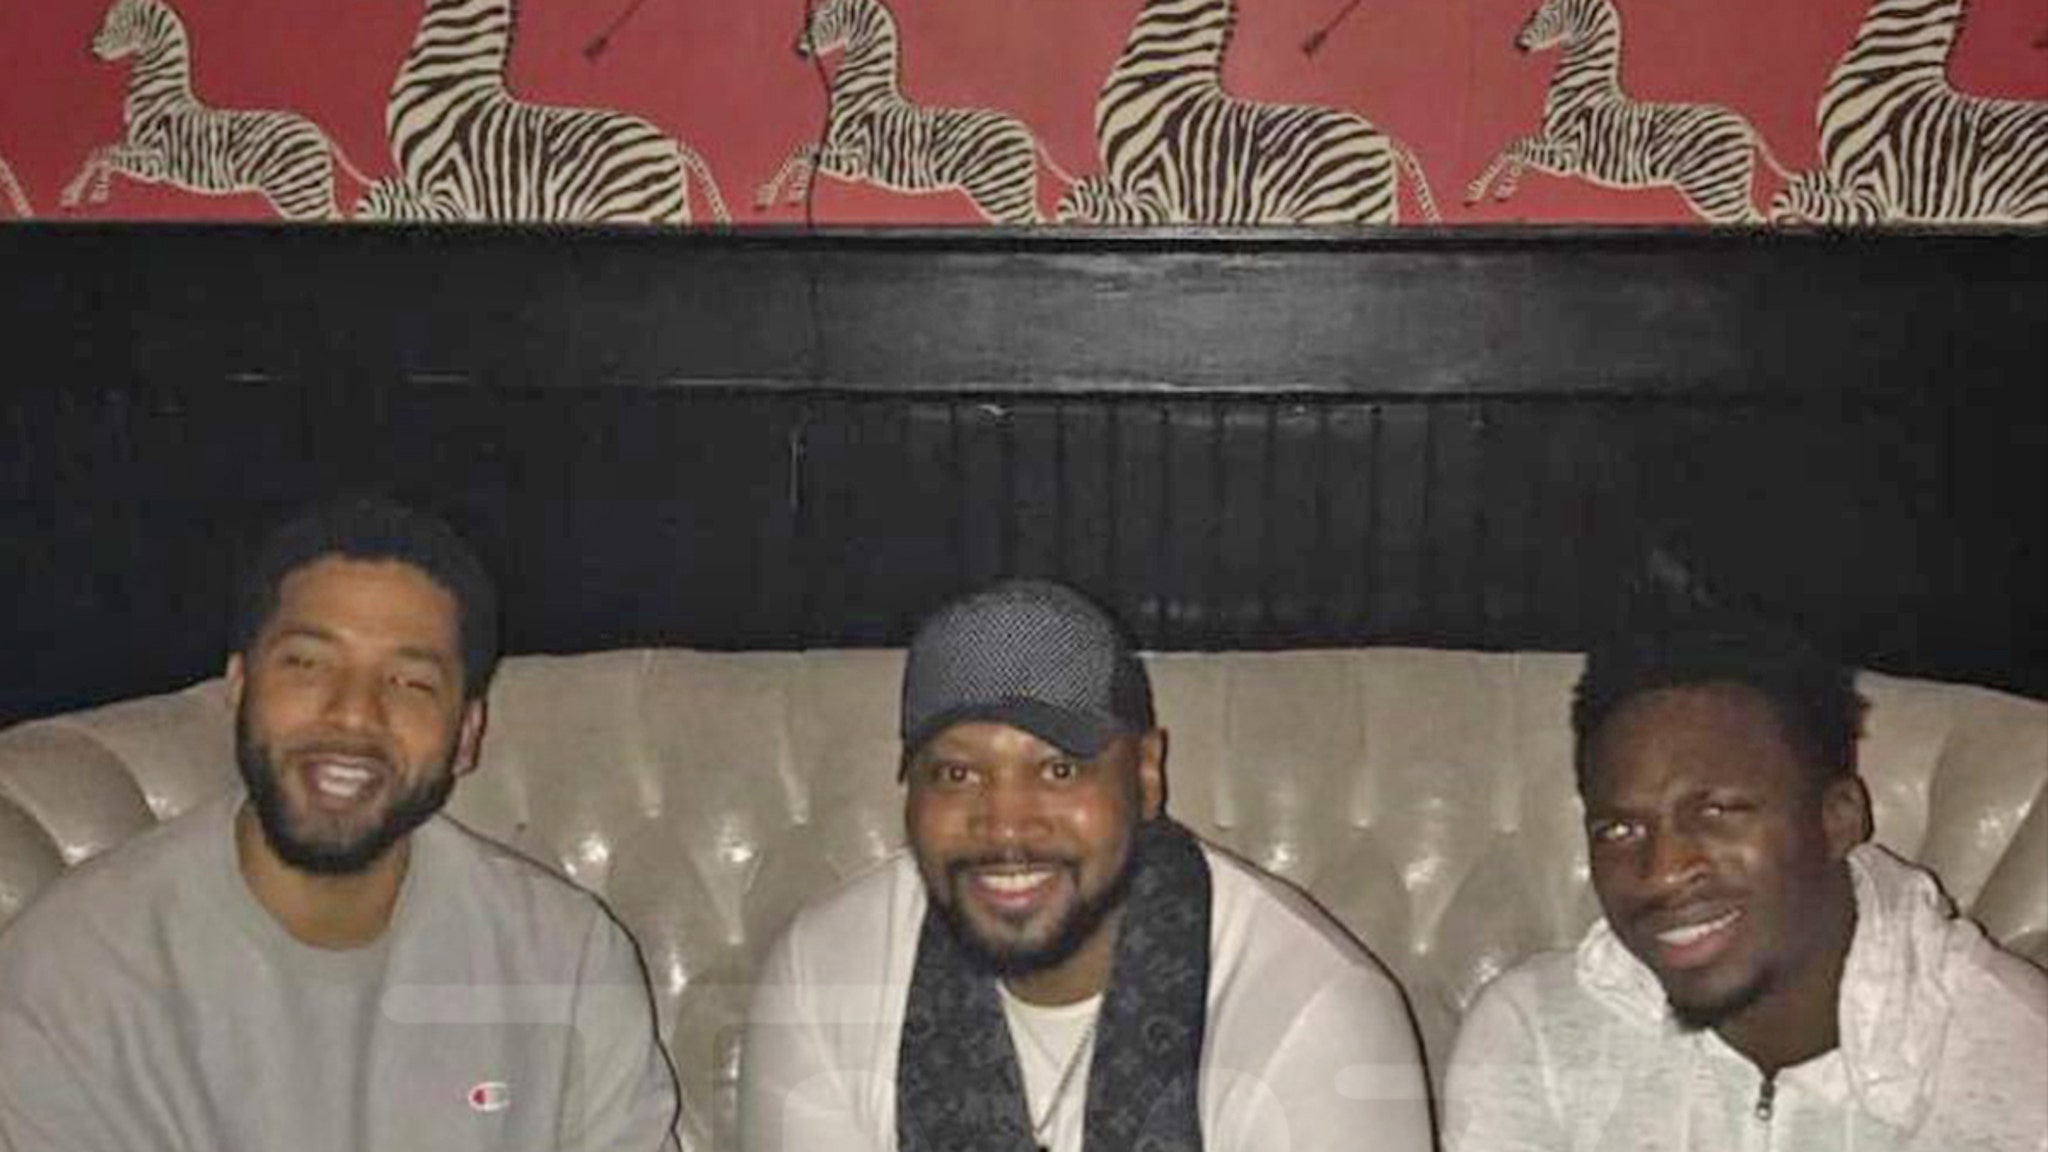 Jussie Smollett and Osundairo Brother Photographed Together Several Times Before..